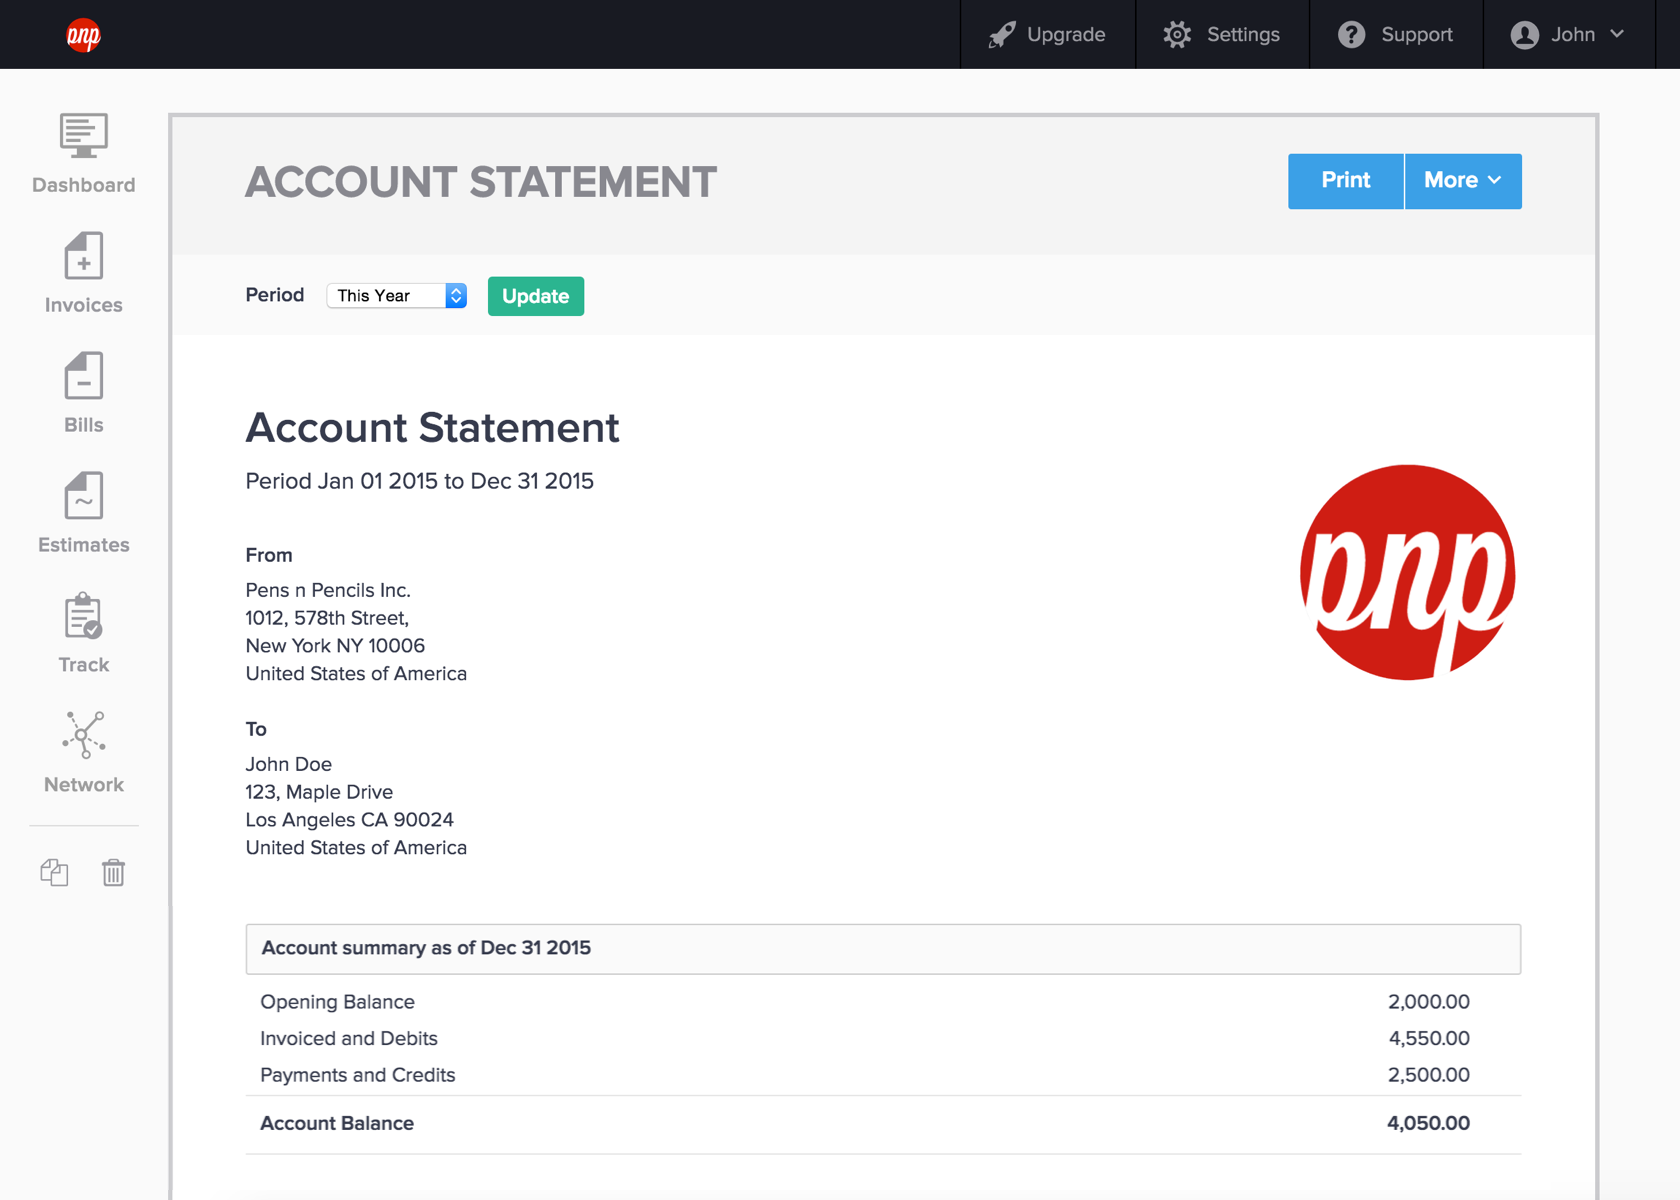 Introducing Account Statements